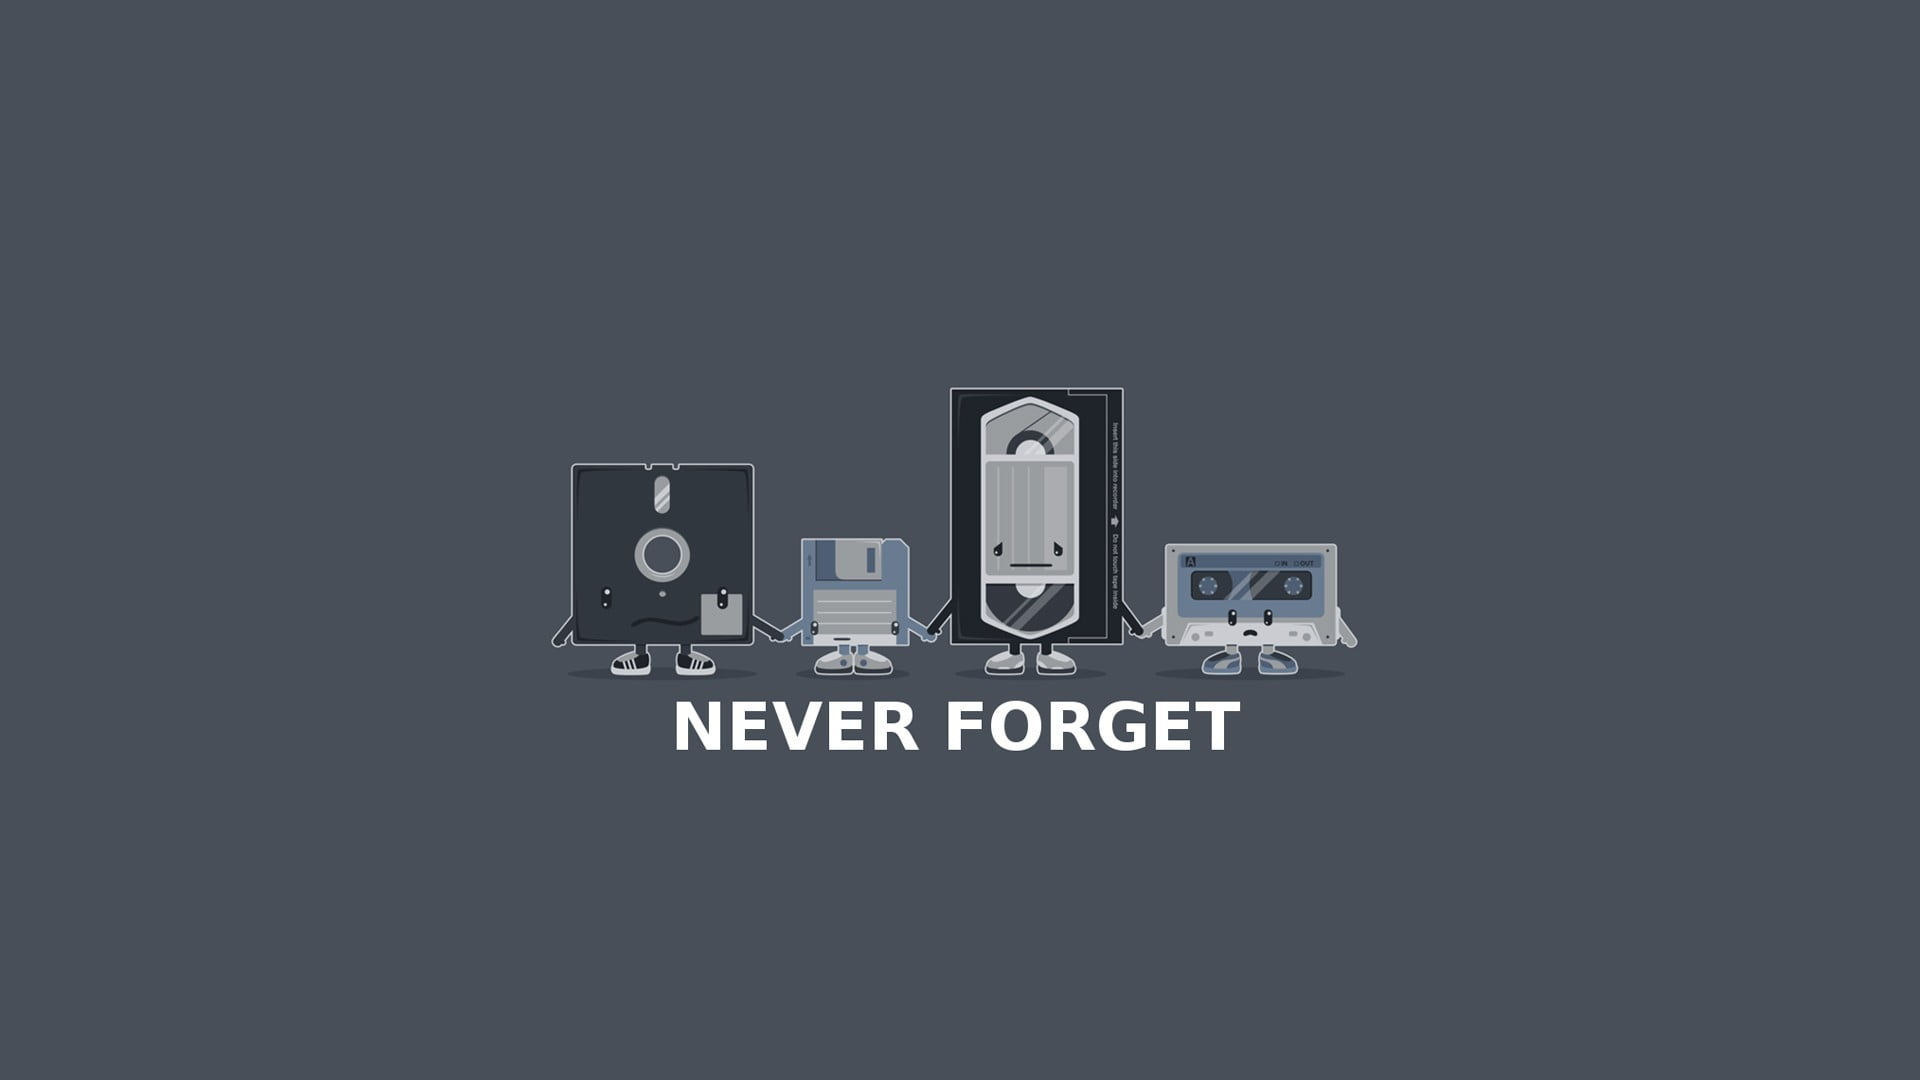 Grey background with never forget text overlay, never forget text